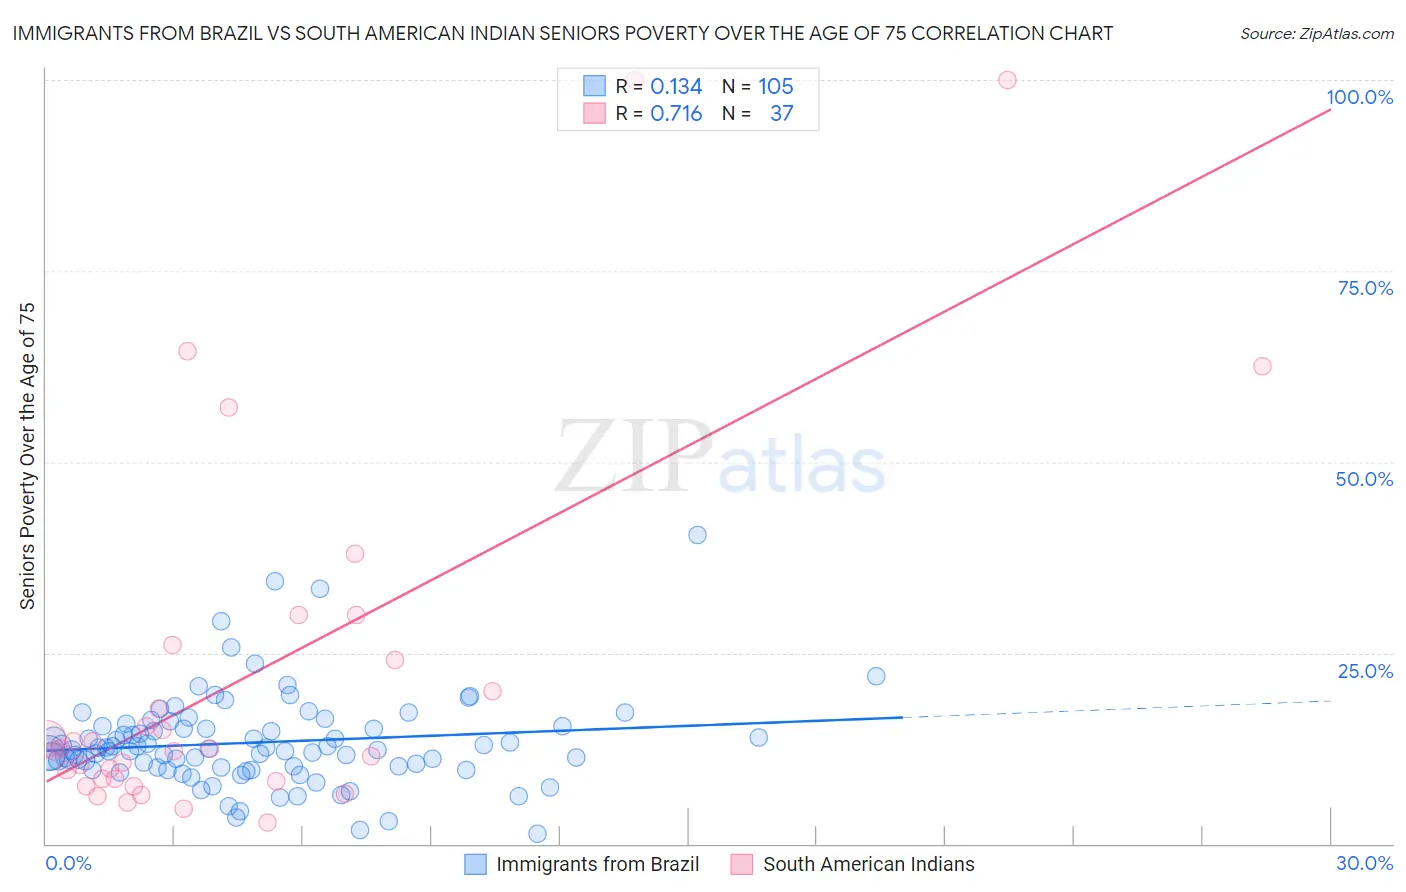 Immigrants from Brazil vs South American Indian Seniors Poverty Over the Age of 75